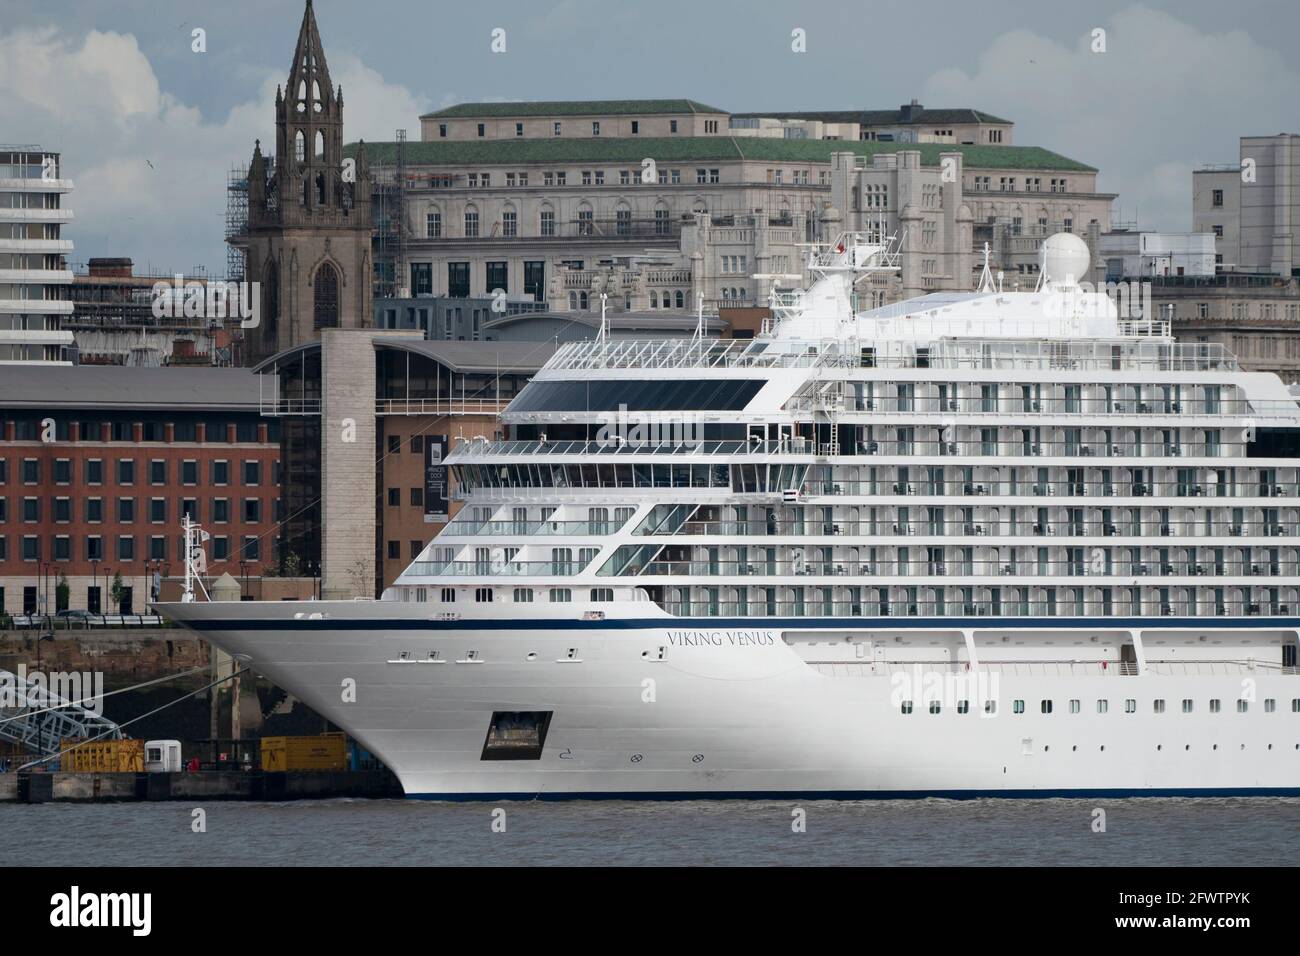 Liverpool, UK, 24th May 2021. The Viking Venus a brand new ship will leaves Liverpool after her first visit to the city launch the cruise season. Liverpool Cruise Terminal is expecting around 80 cruise ships as lockdown restrictions ease. Credit: Jon Super/Alamy Live News. Stock Photo